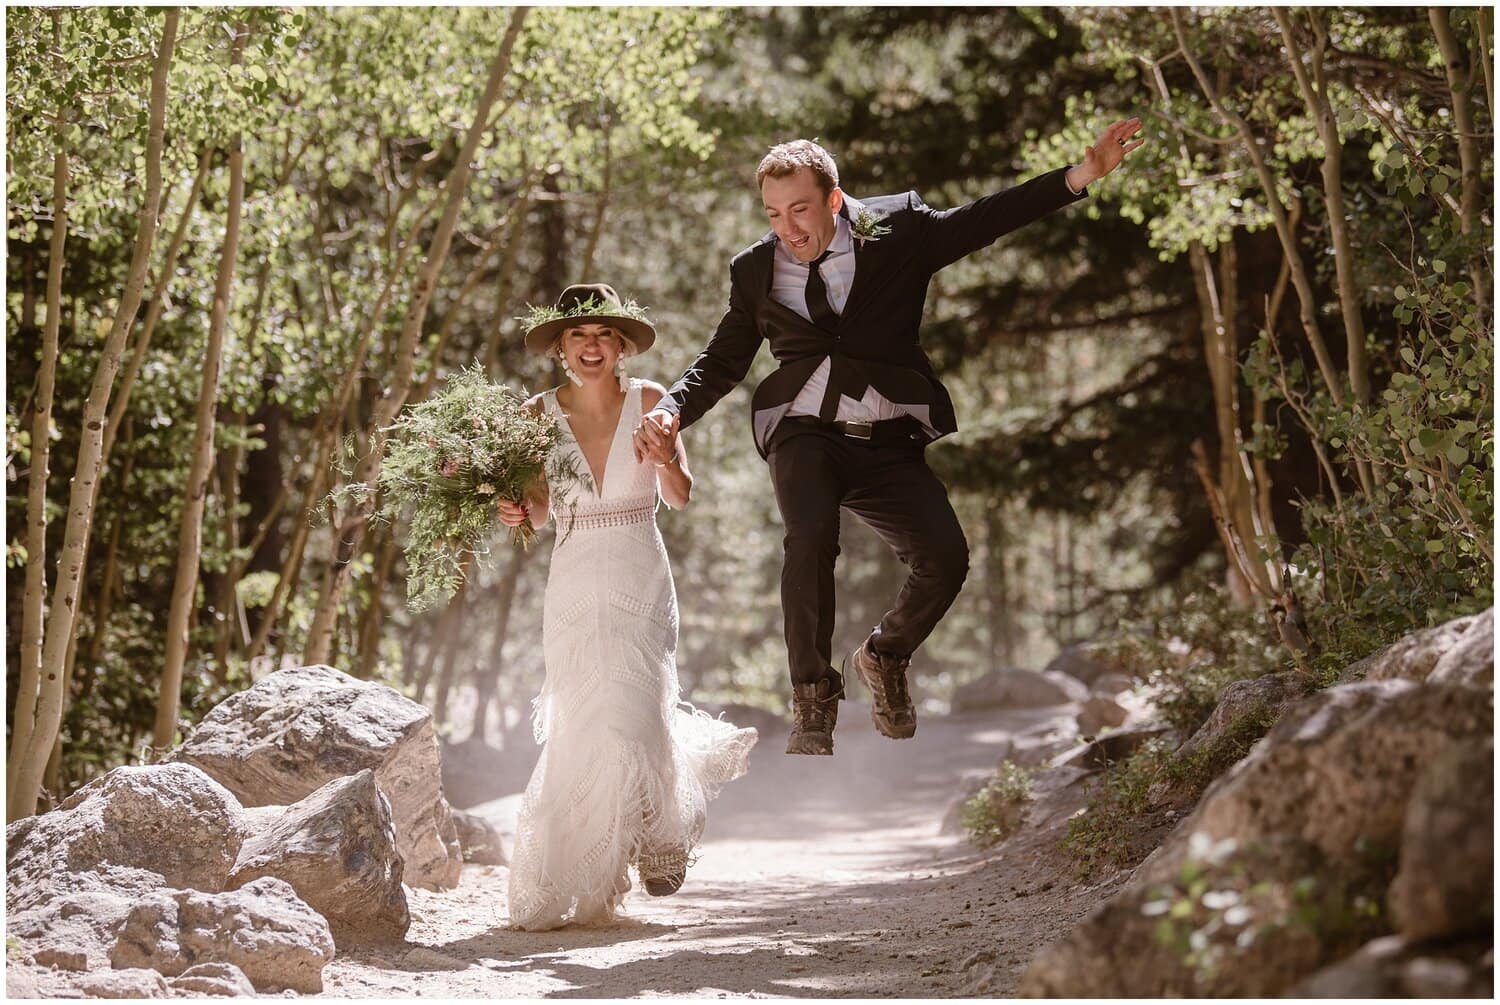 Bride and groom on hiking trail, surrounded by trees and rocks. Groom is jumping in the air. 